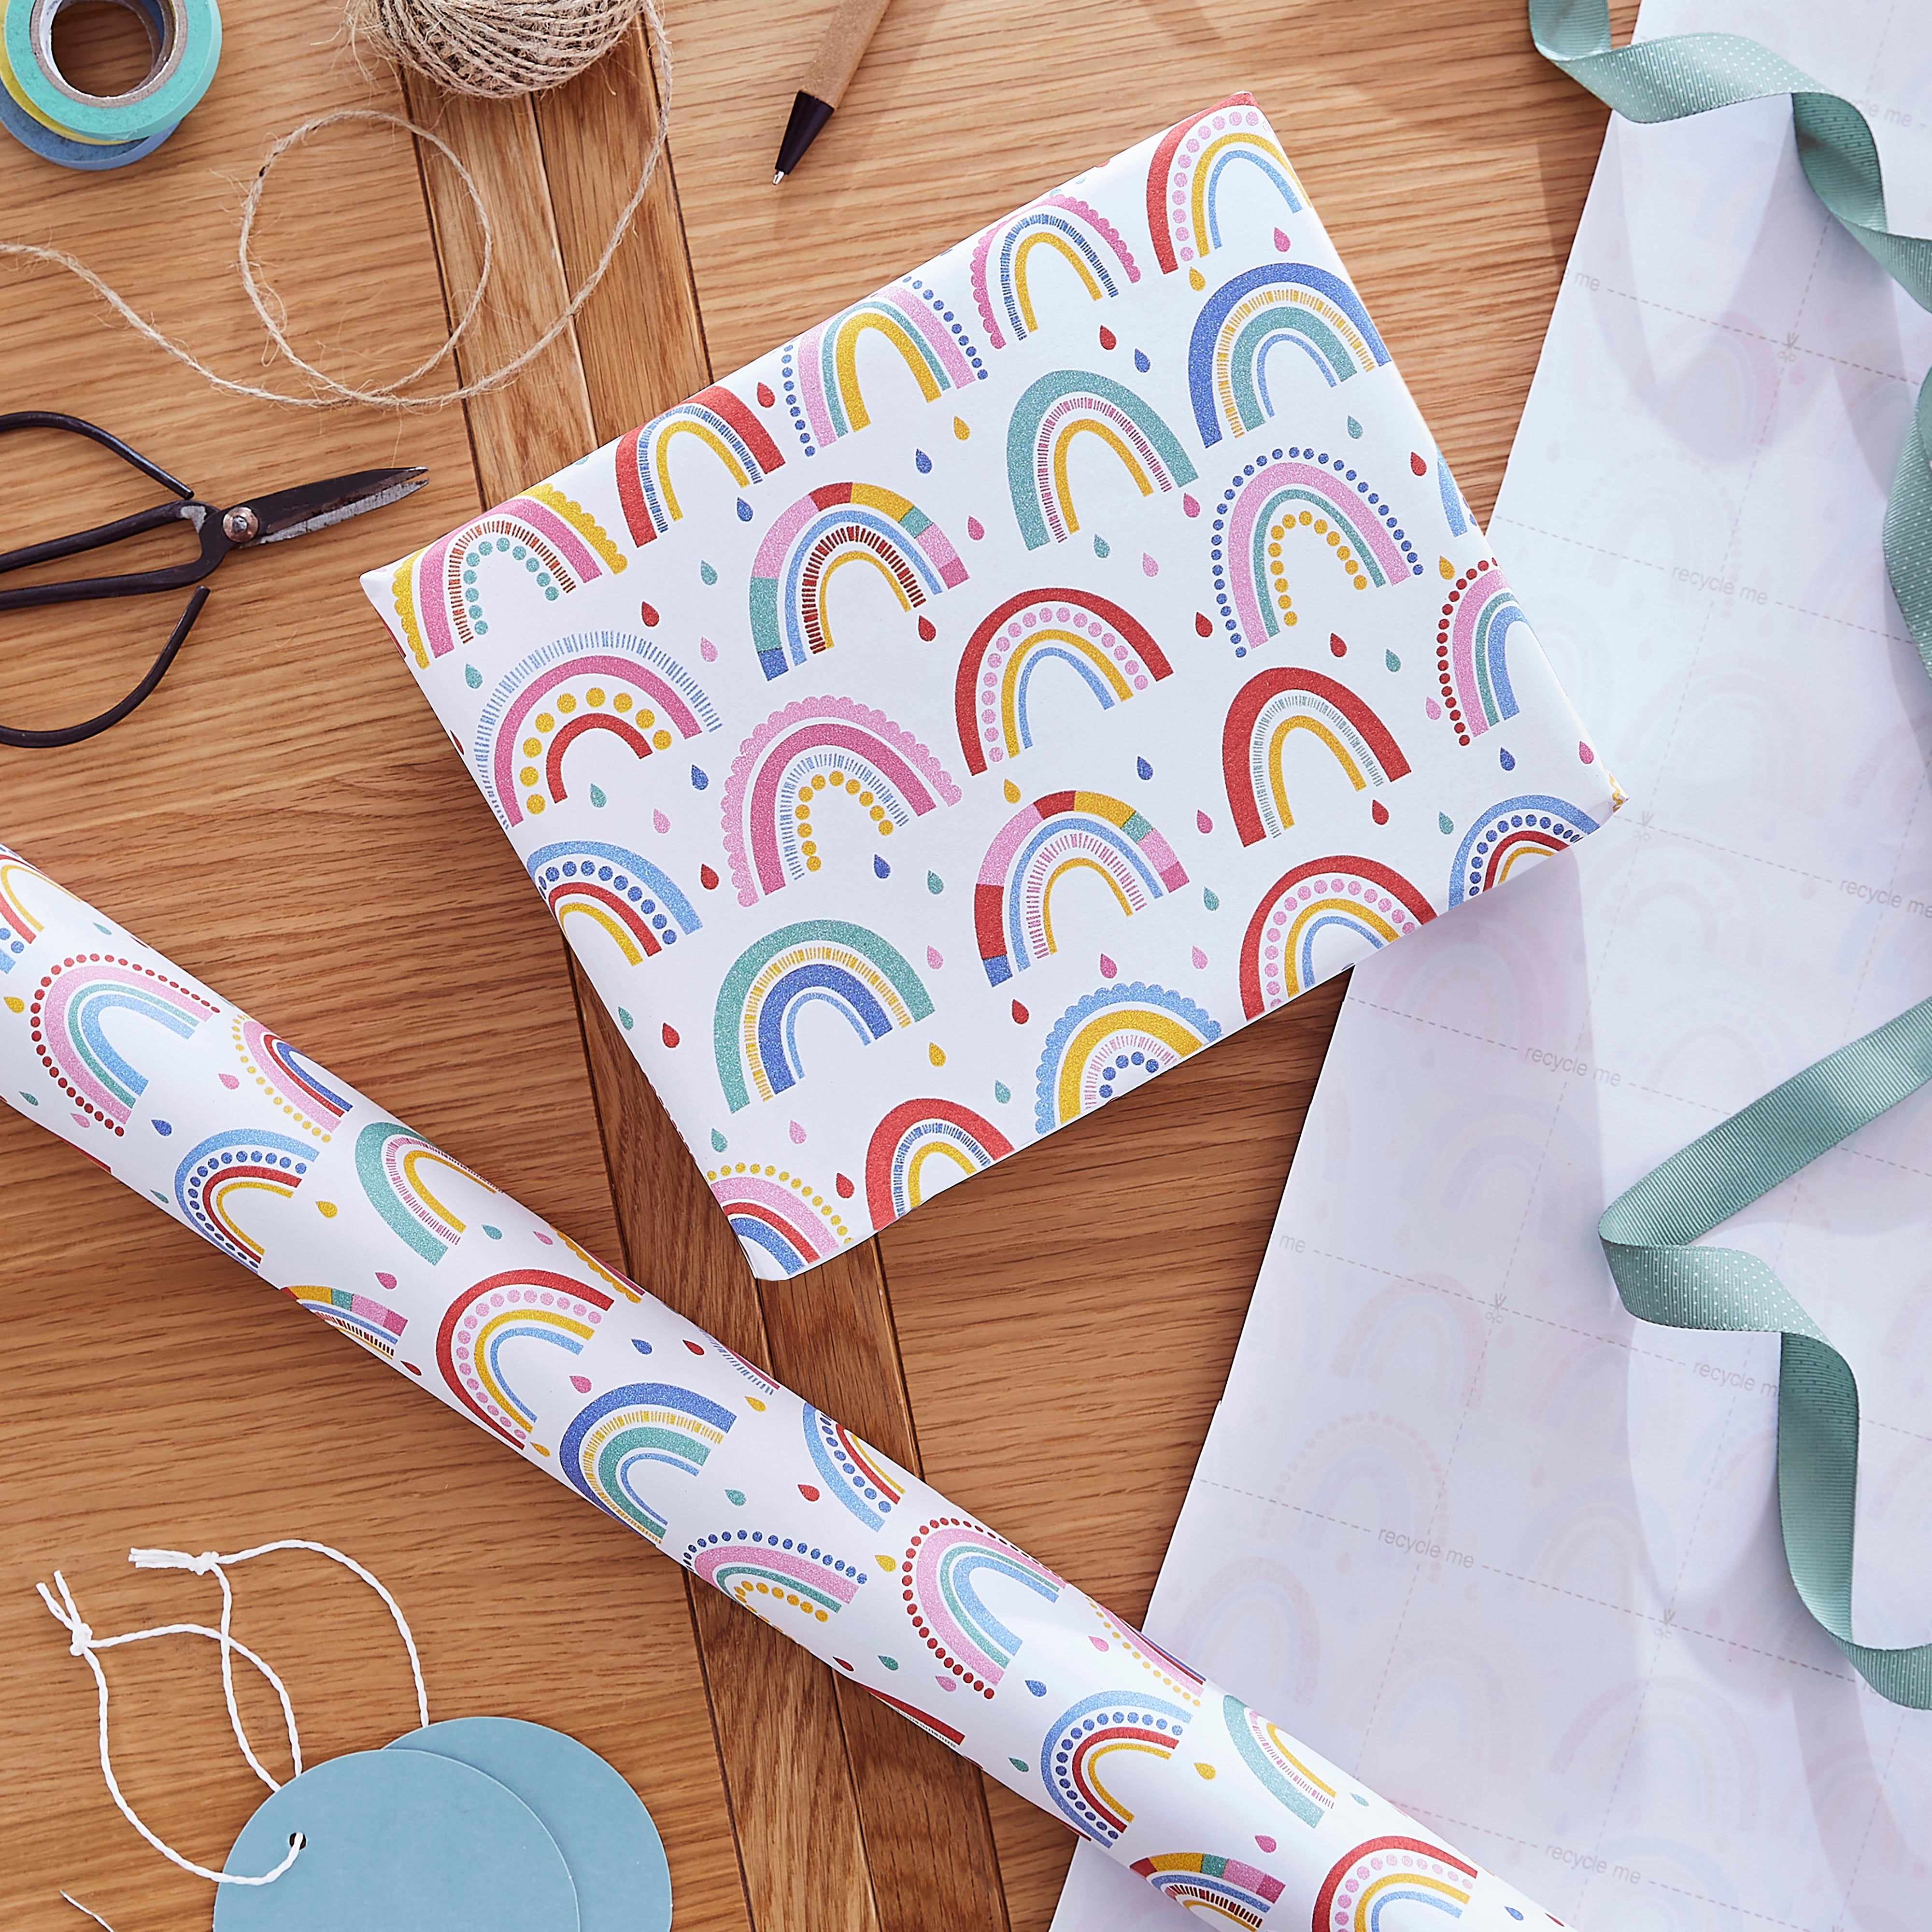 Wrapped Up In Rainbows: DIY - Pretty Pens